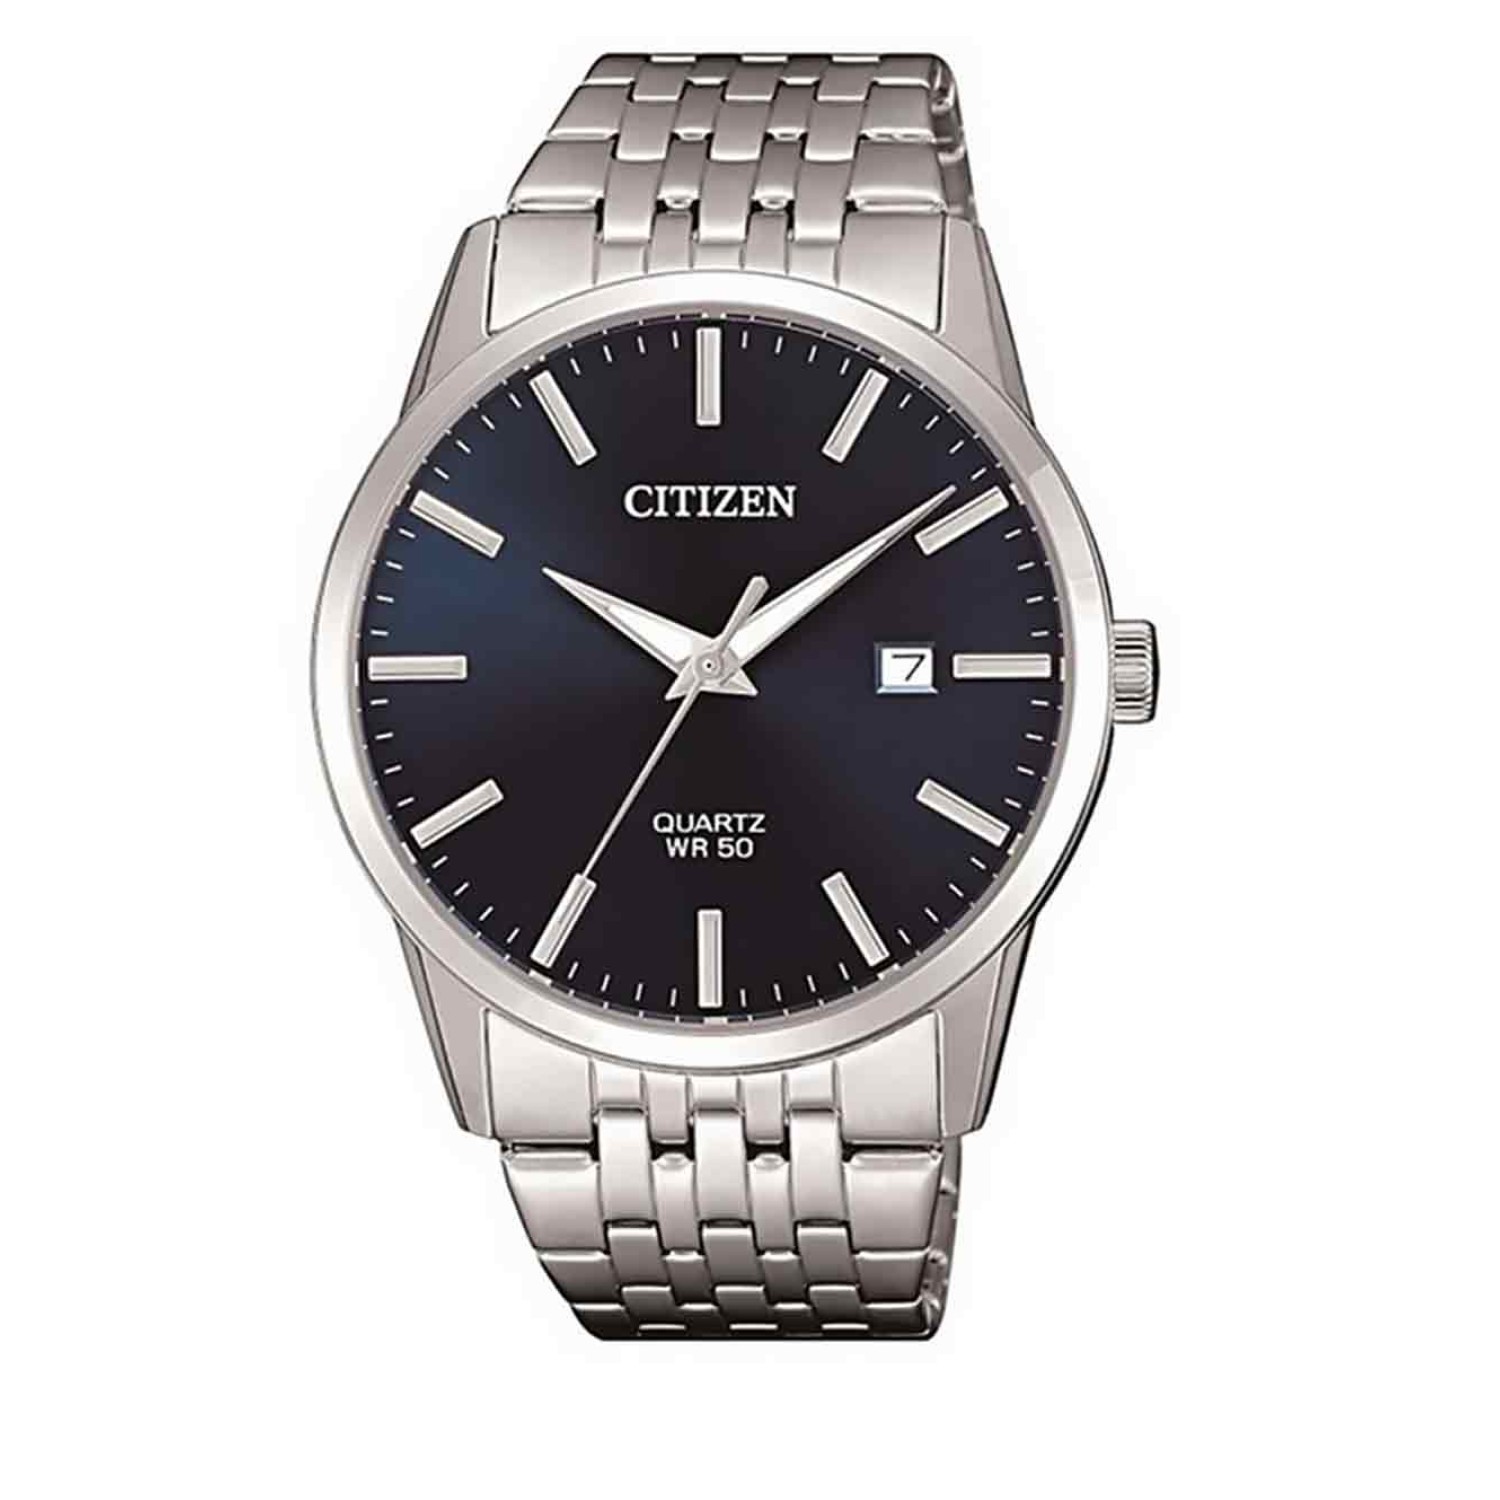 BI5000-87L Citizen Mens Stainless Steel  Watch. Crafted from stainless steel and mineral glass, plus featuring 3 year battery life and WR50/5bar, it is dependable when the pressure is on. Additionally, with push button buckle and date display, it factors 